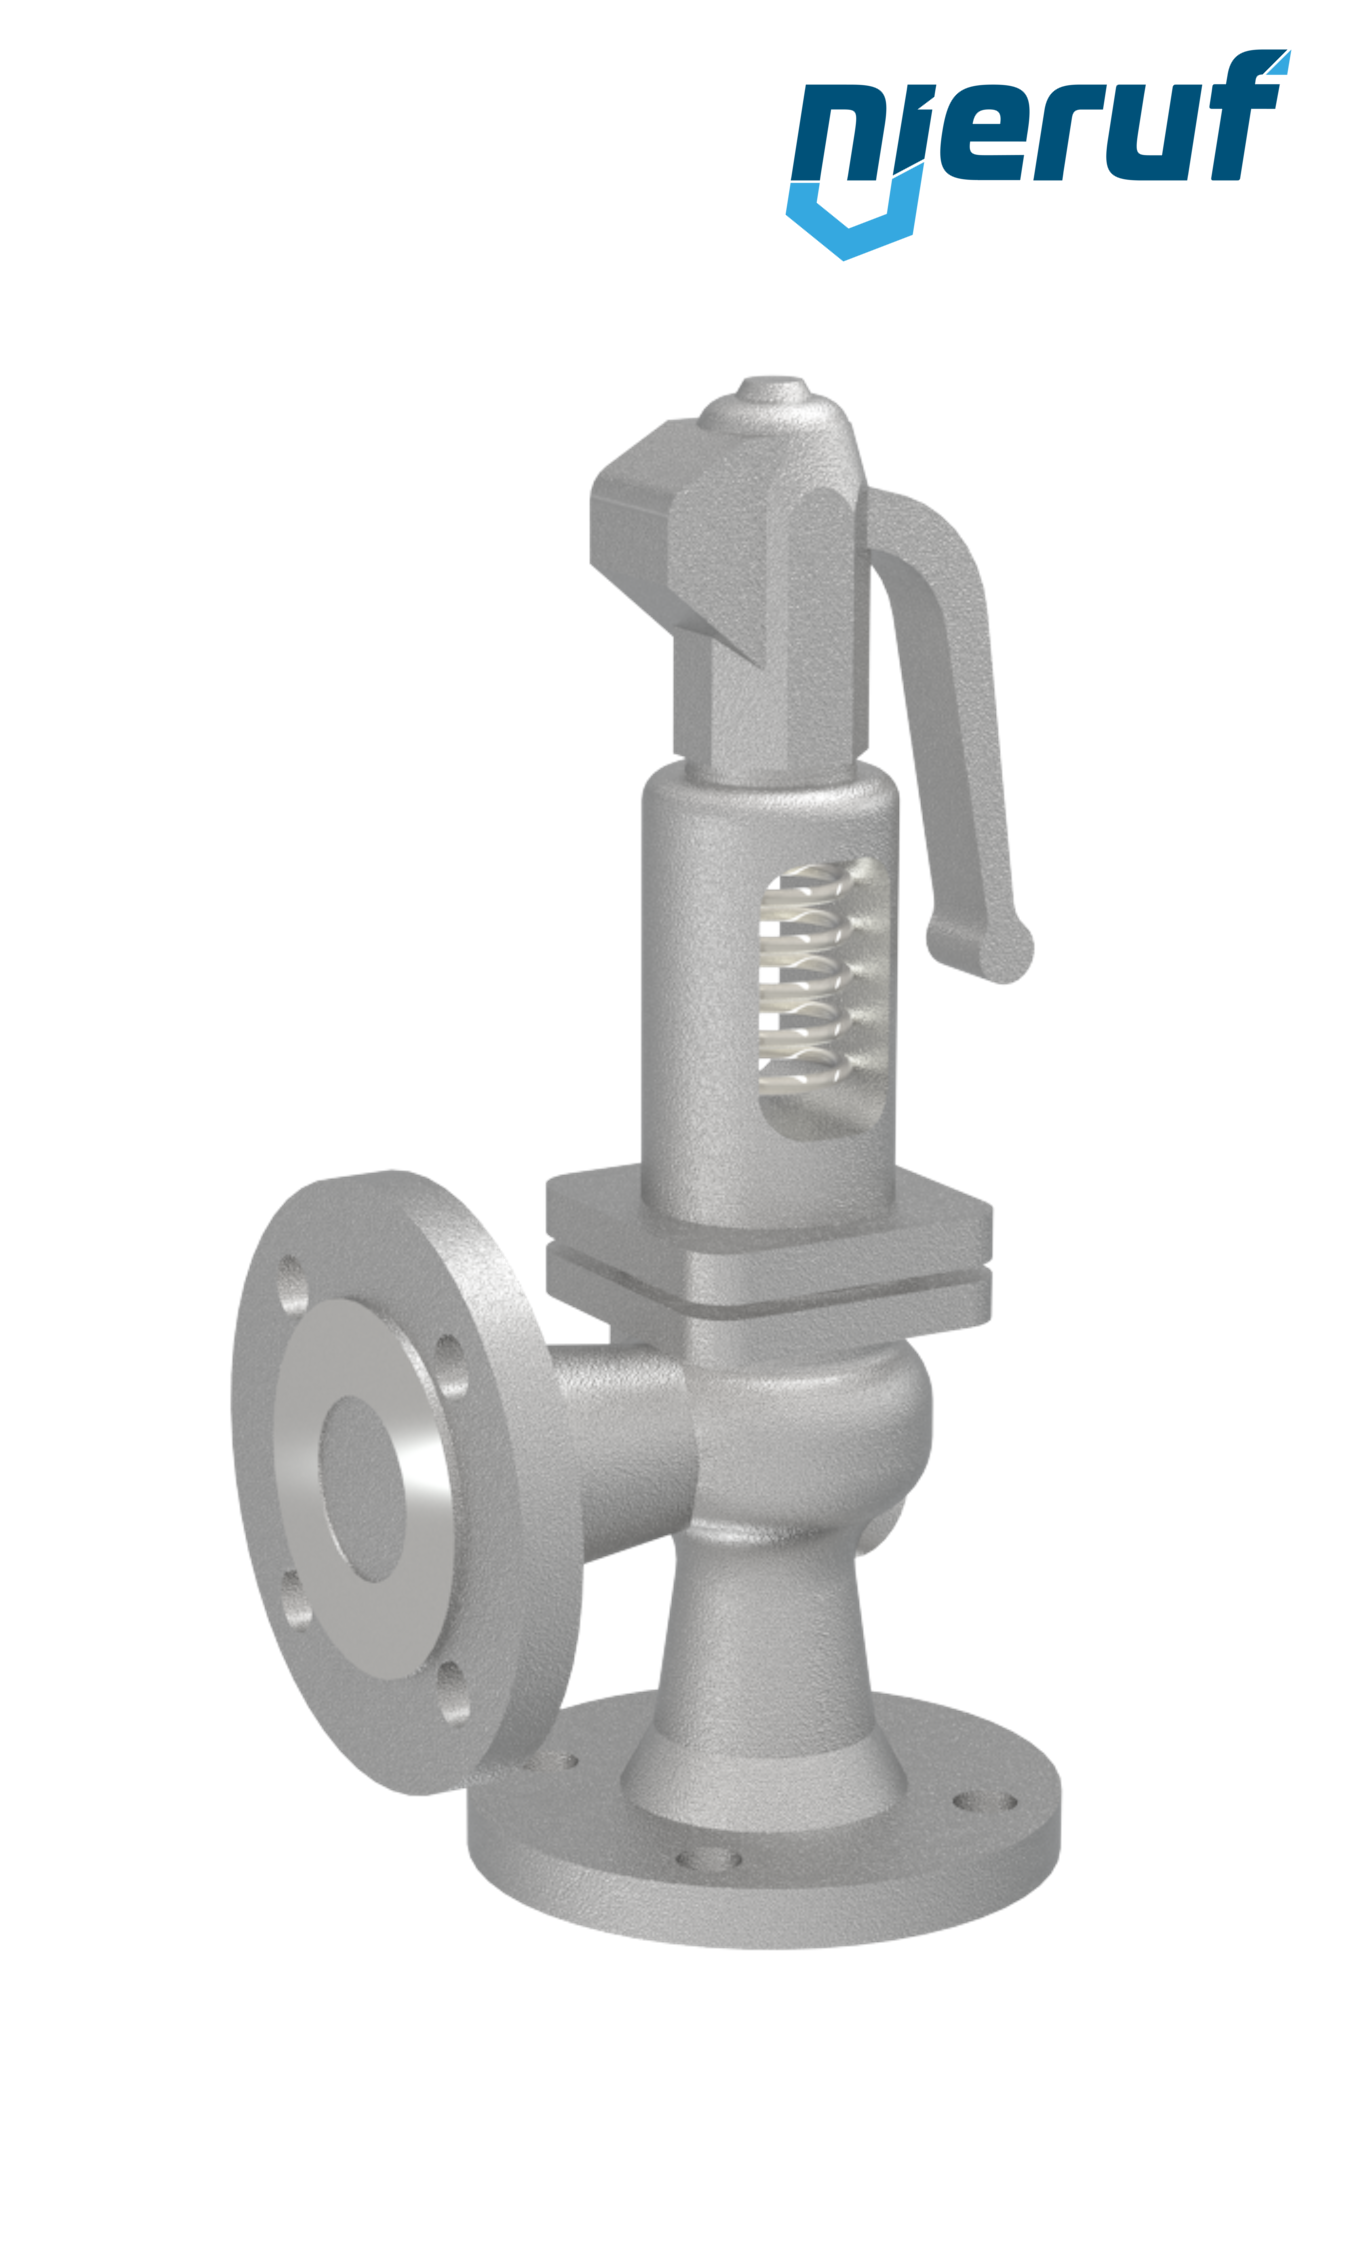 flange-safety valve DN50/DN50 SF0102, cast iron EN-JL1040 metal, with lever